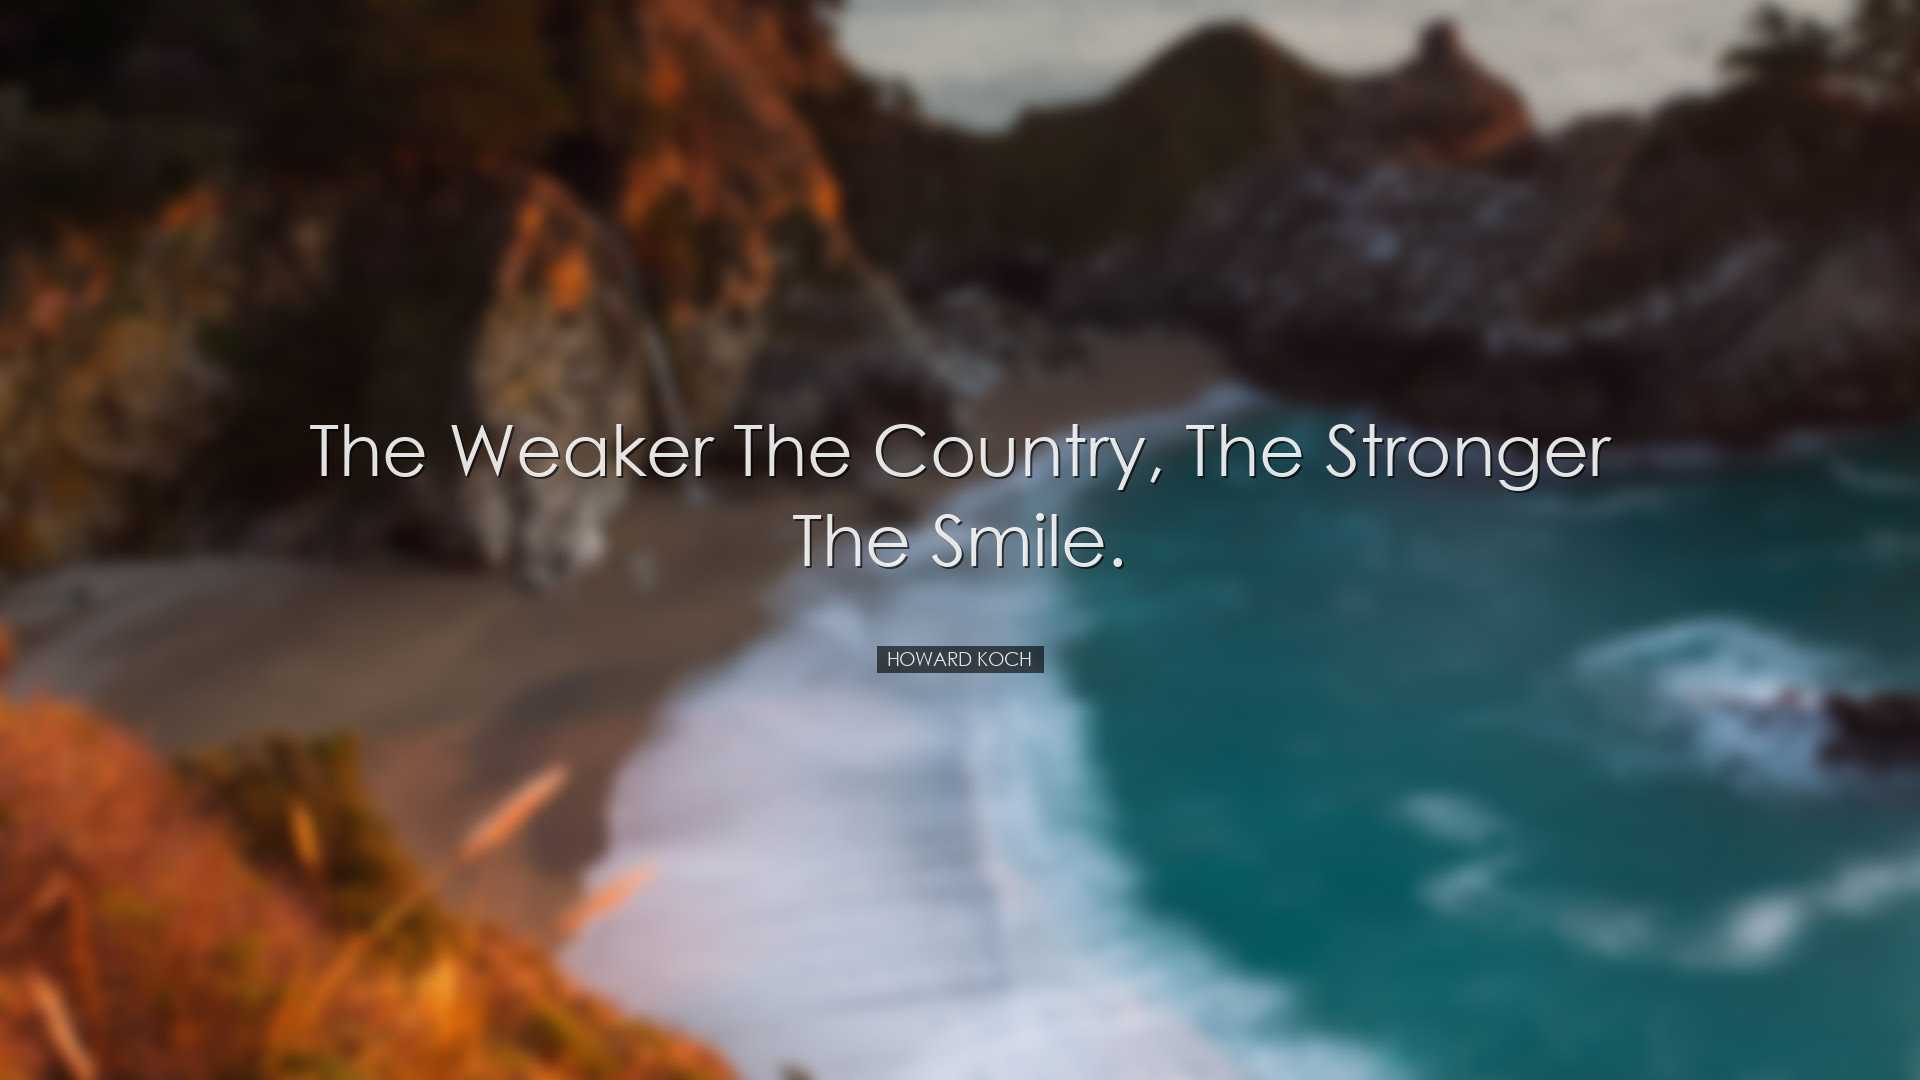 The weaker the country, the stronger the smile. - Howard Koch